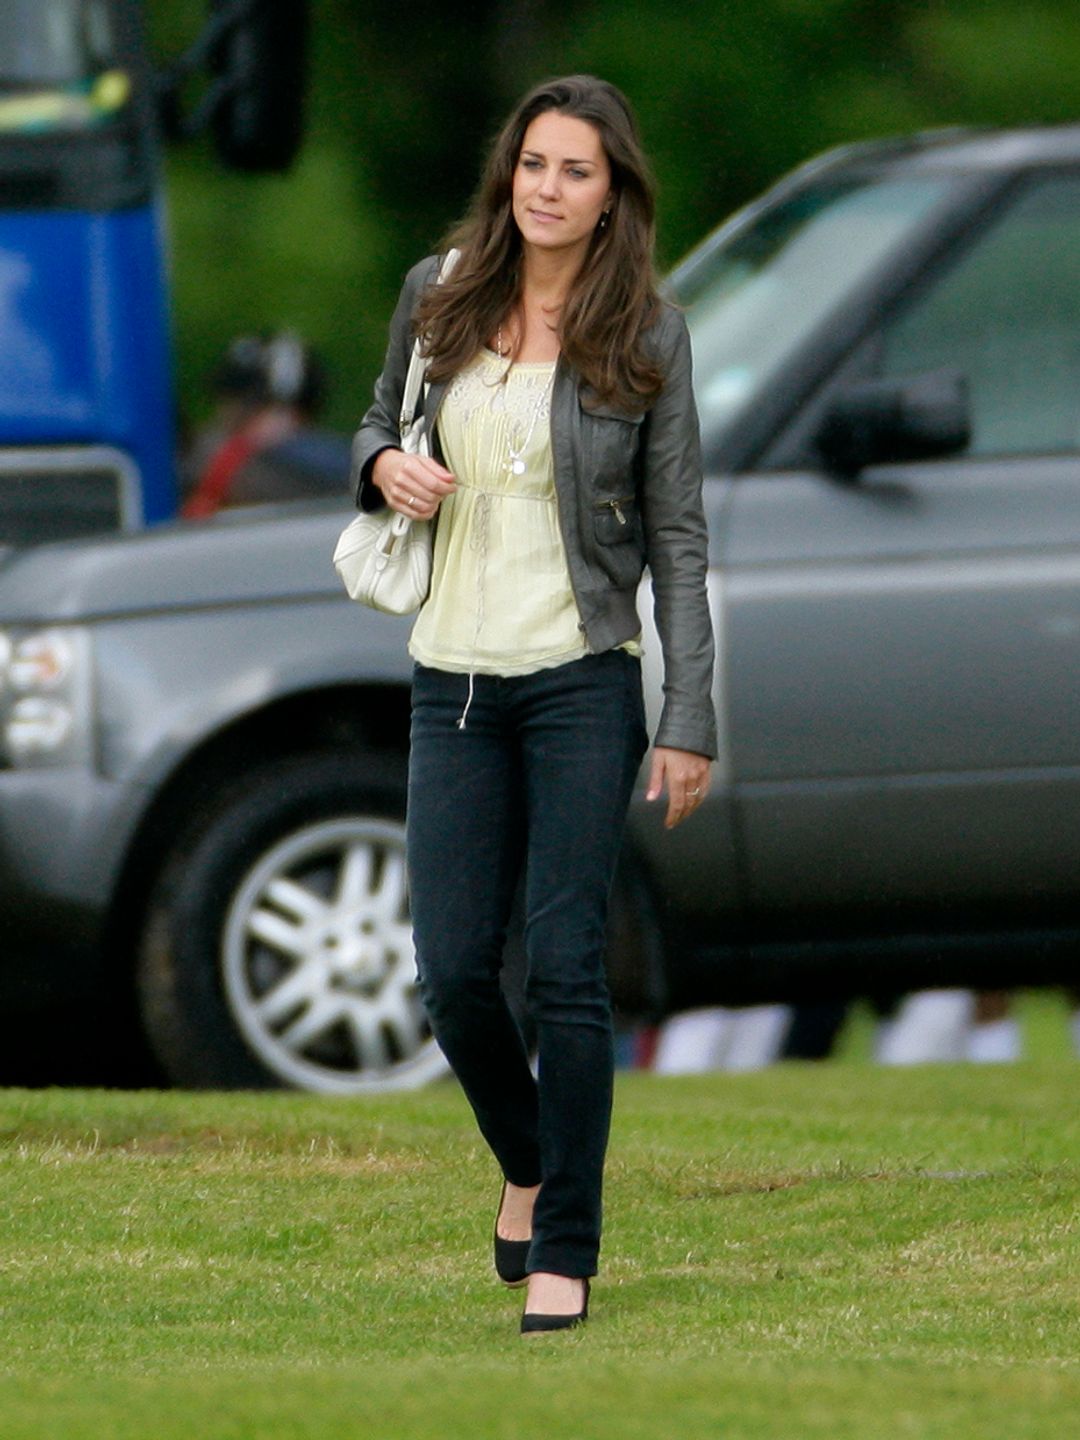 Kate Middleton at The Dorchester Trophy polo match in Cirencester in 2009